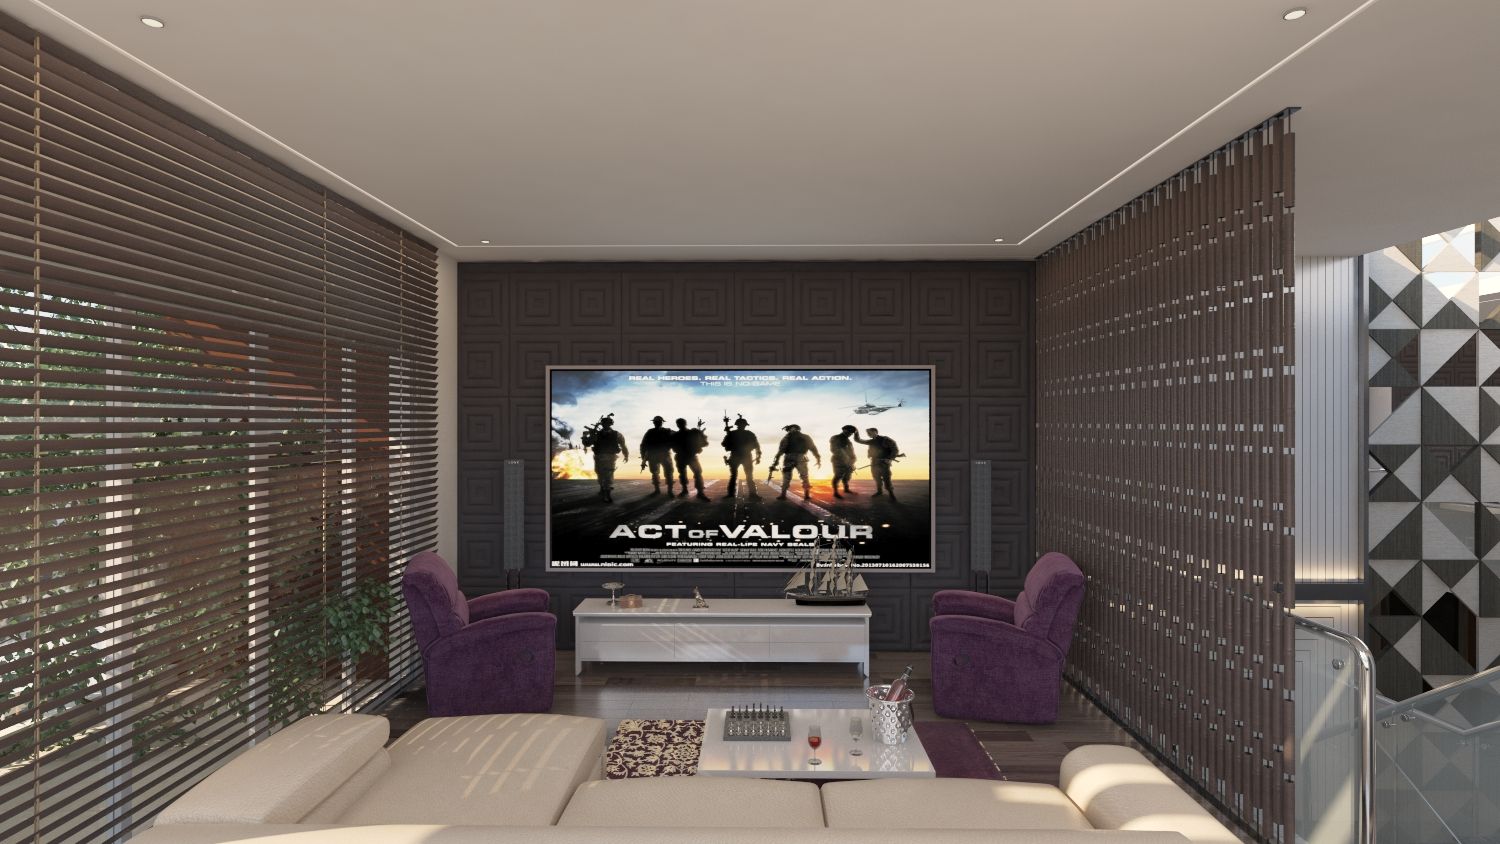 Home theater homify Modern media room